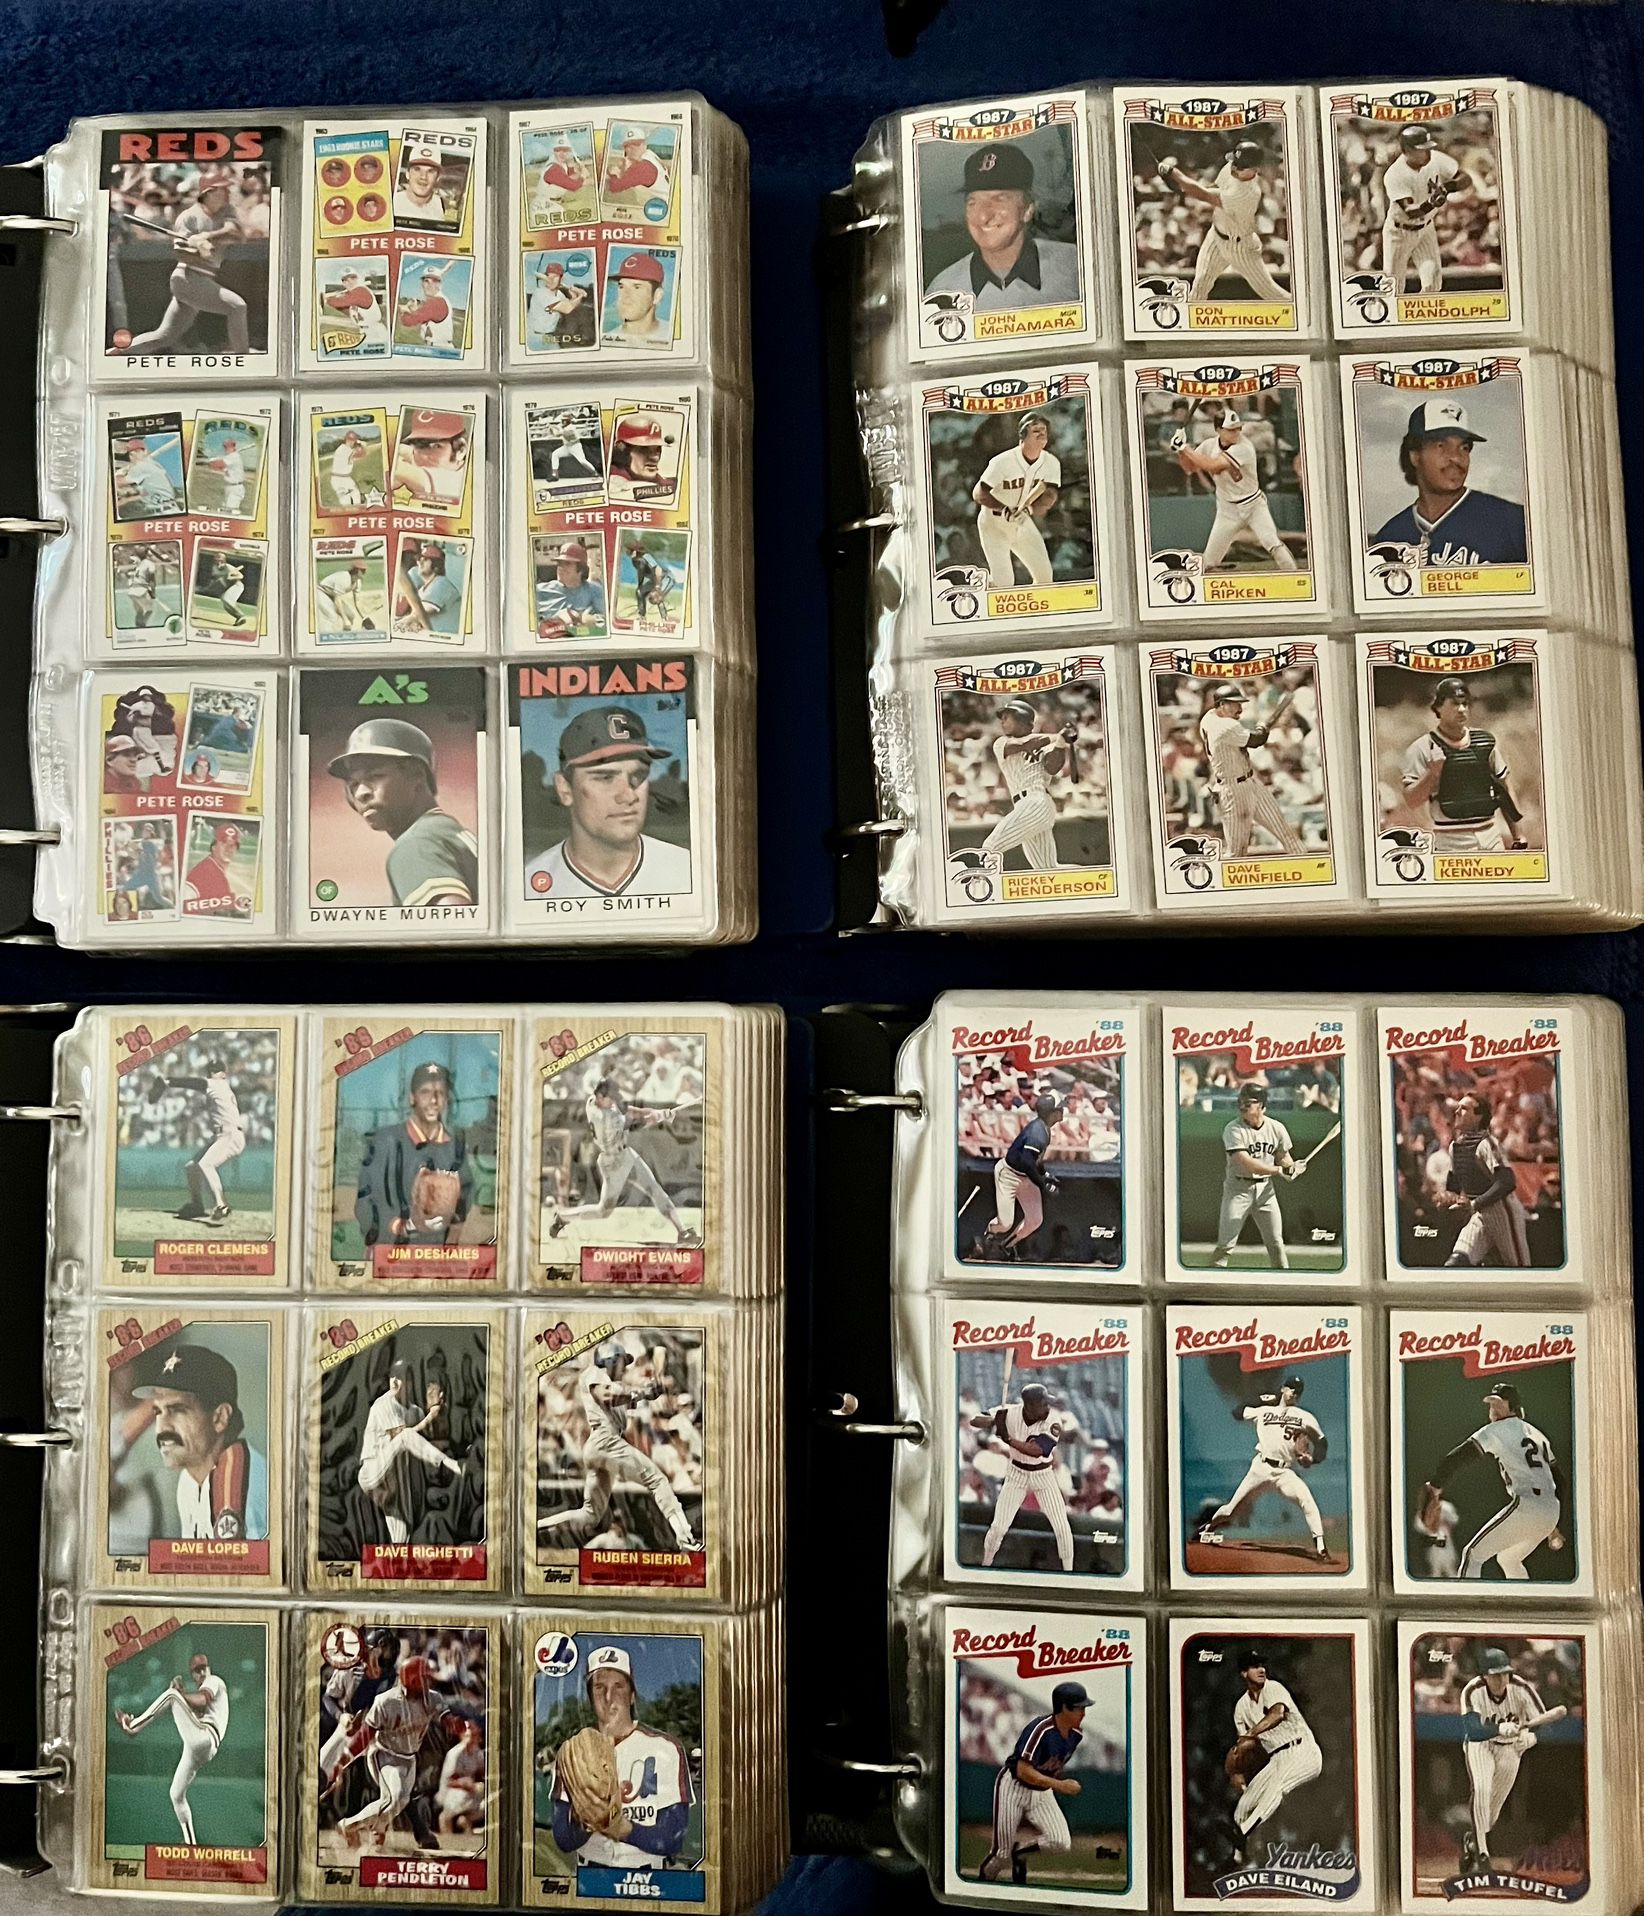 Lot of (4) Topps Baseball Card Complete Sets - 1986, 1987, 1988, 1989 - great condition!